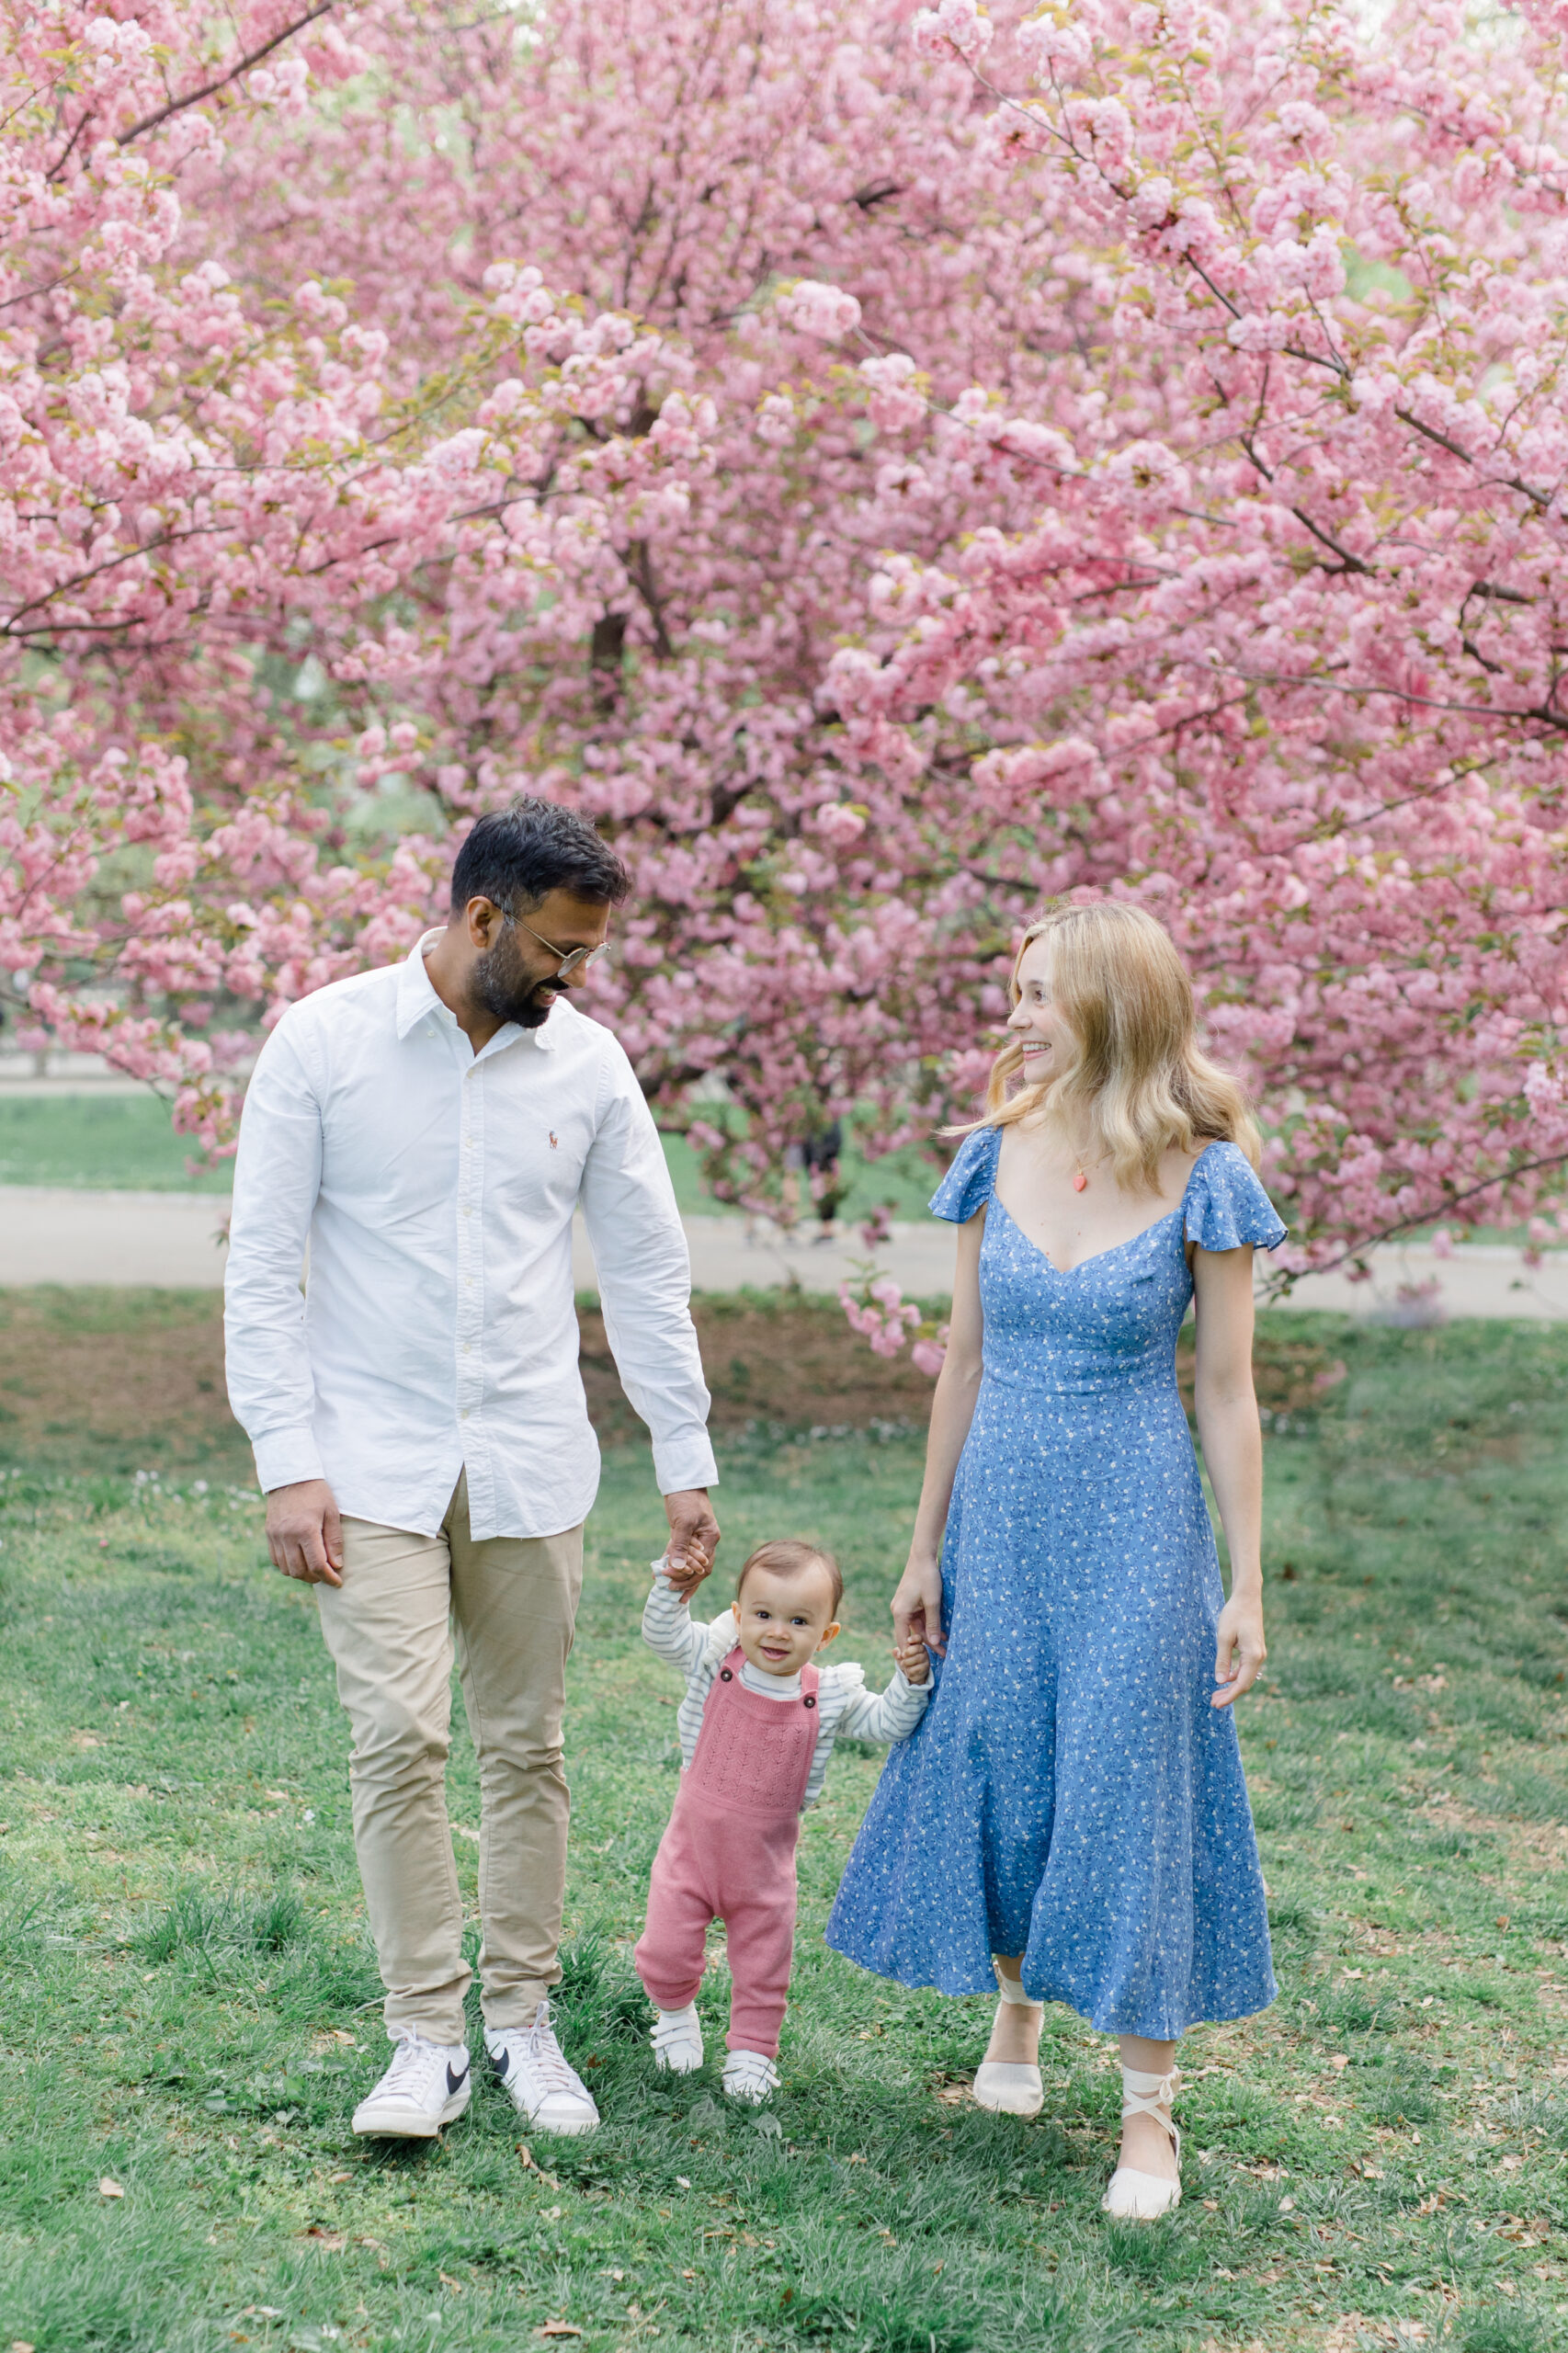 A spring mini session in Central Park with the cherry blossoms, shot by Jacqueline Clair Photography